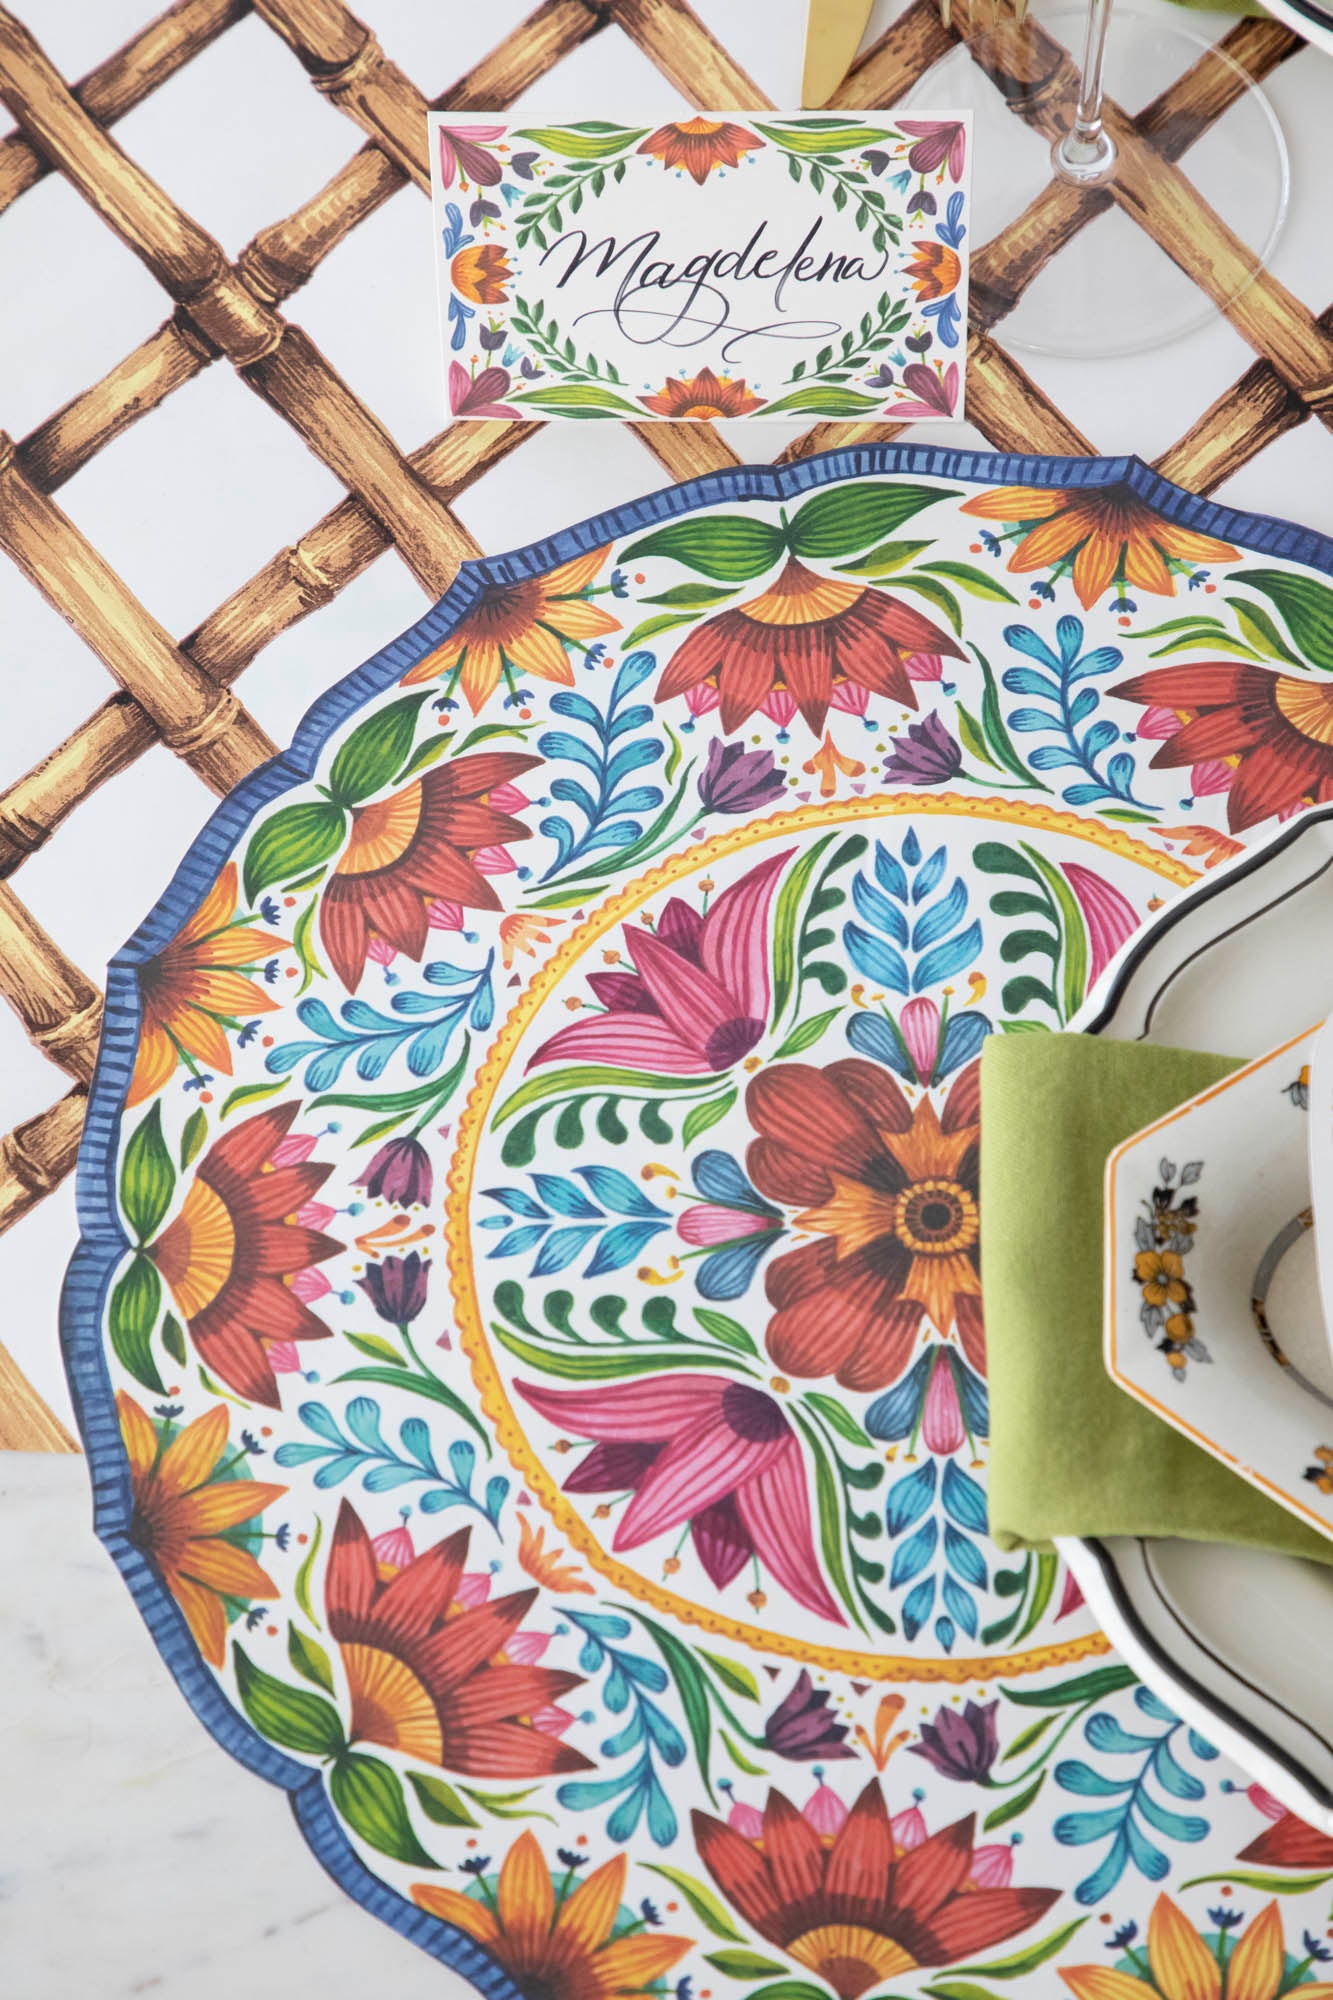 A place setting with a Die-cut Fiesta Floral Placemat by Hester &amp; Cook.